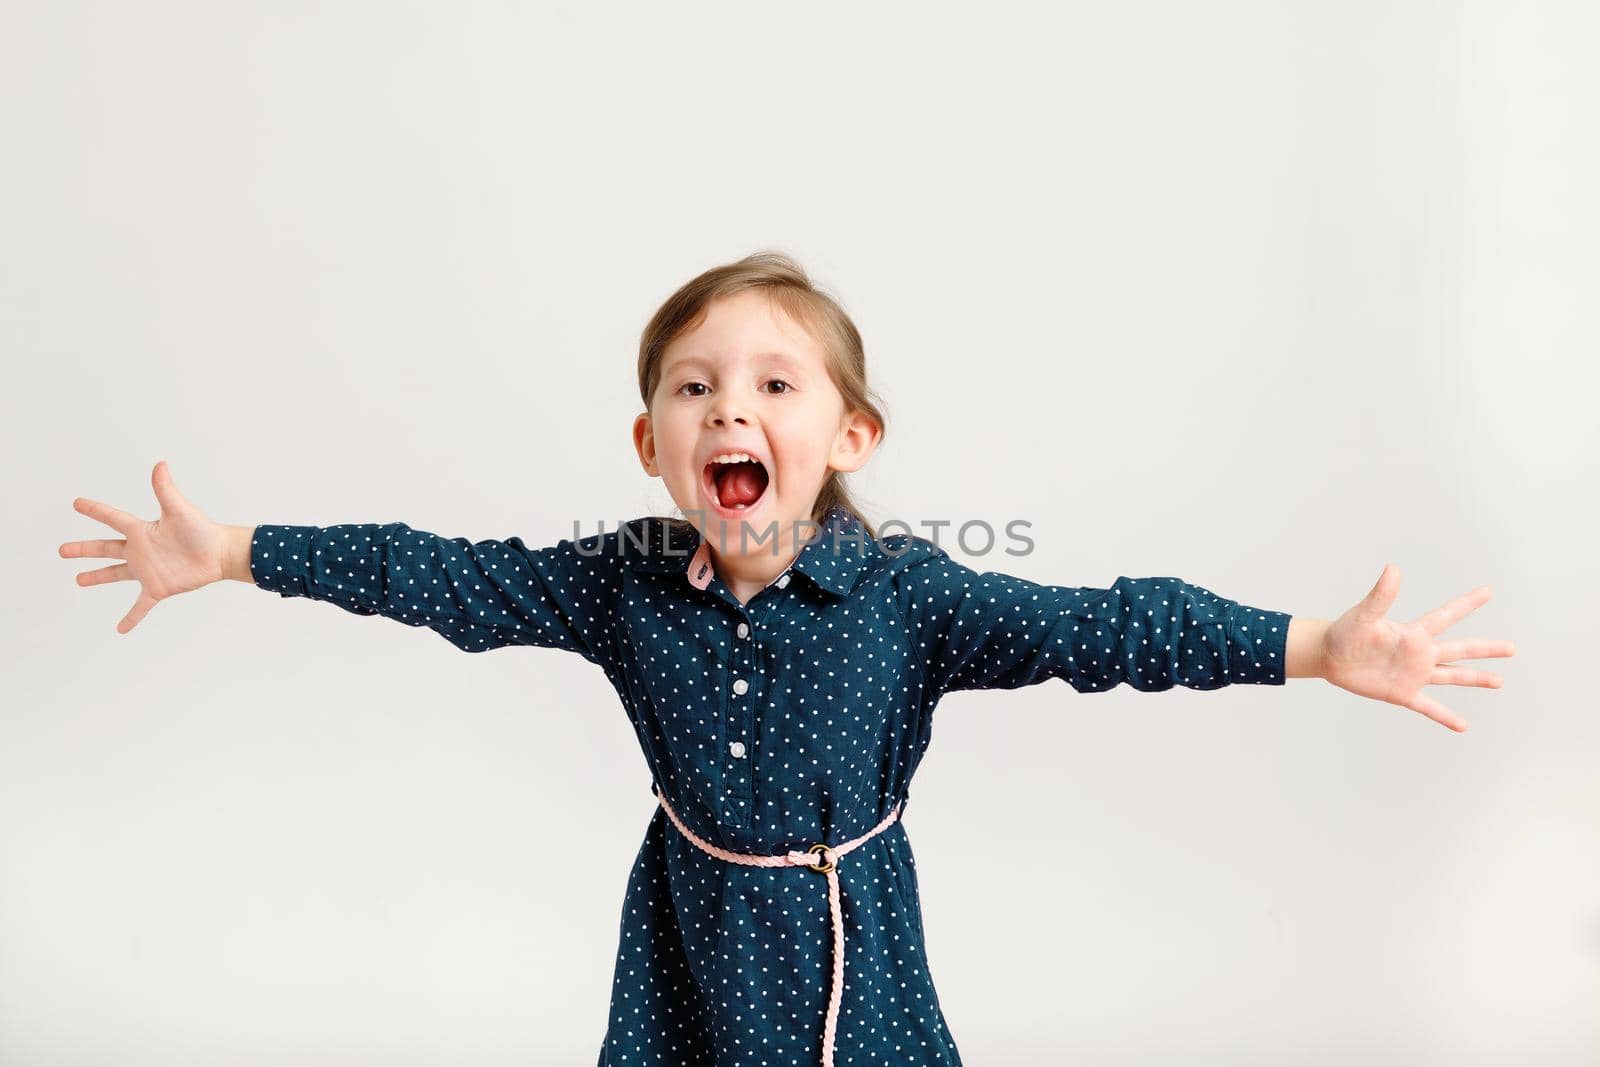 Little cute screaming girl 4-6 years old wearing a blue dress with polka dots standing with hand in different directions. Cute kid girl on a white background